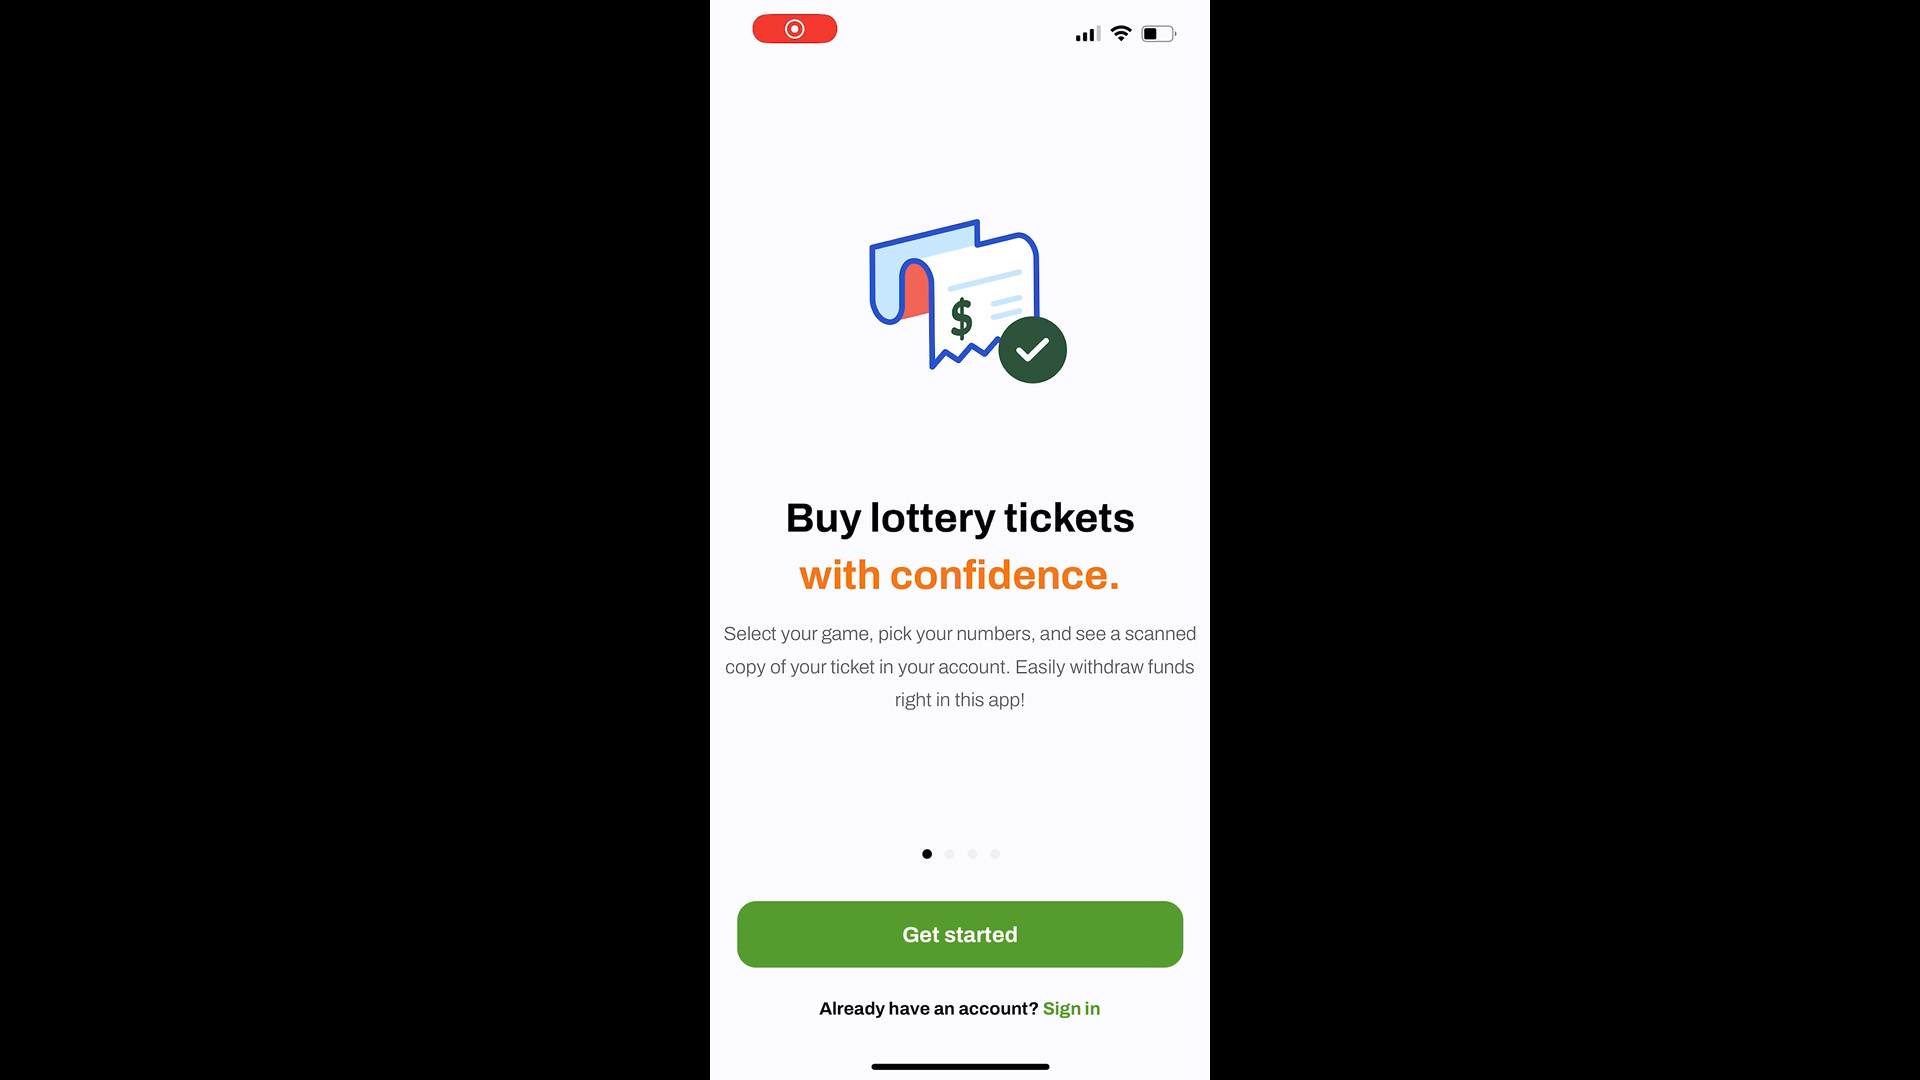 Jackpot.com offers an easy, secure, and responsible way to play the lottery right from your phone, tablet, or desktop. Now available in Texas!